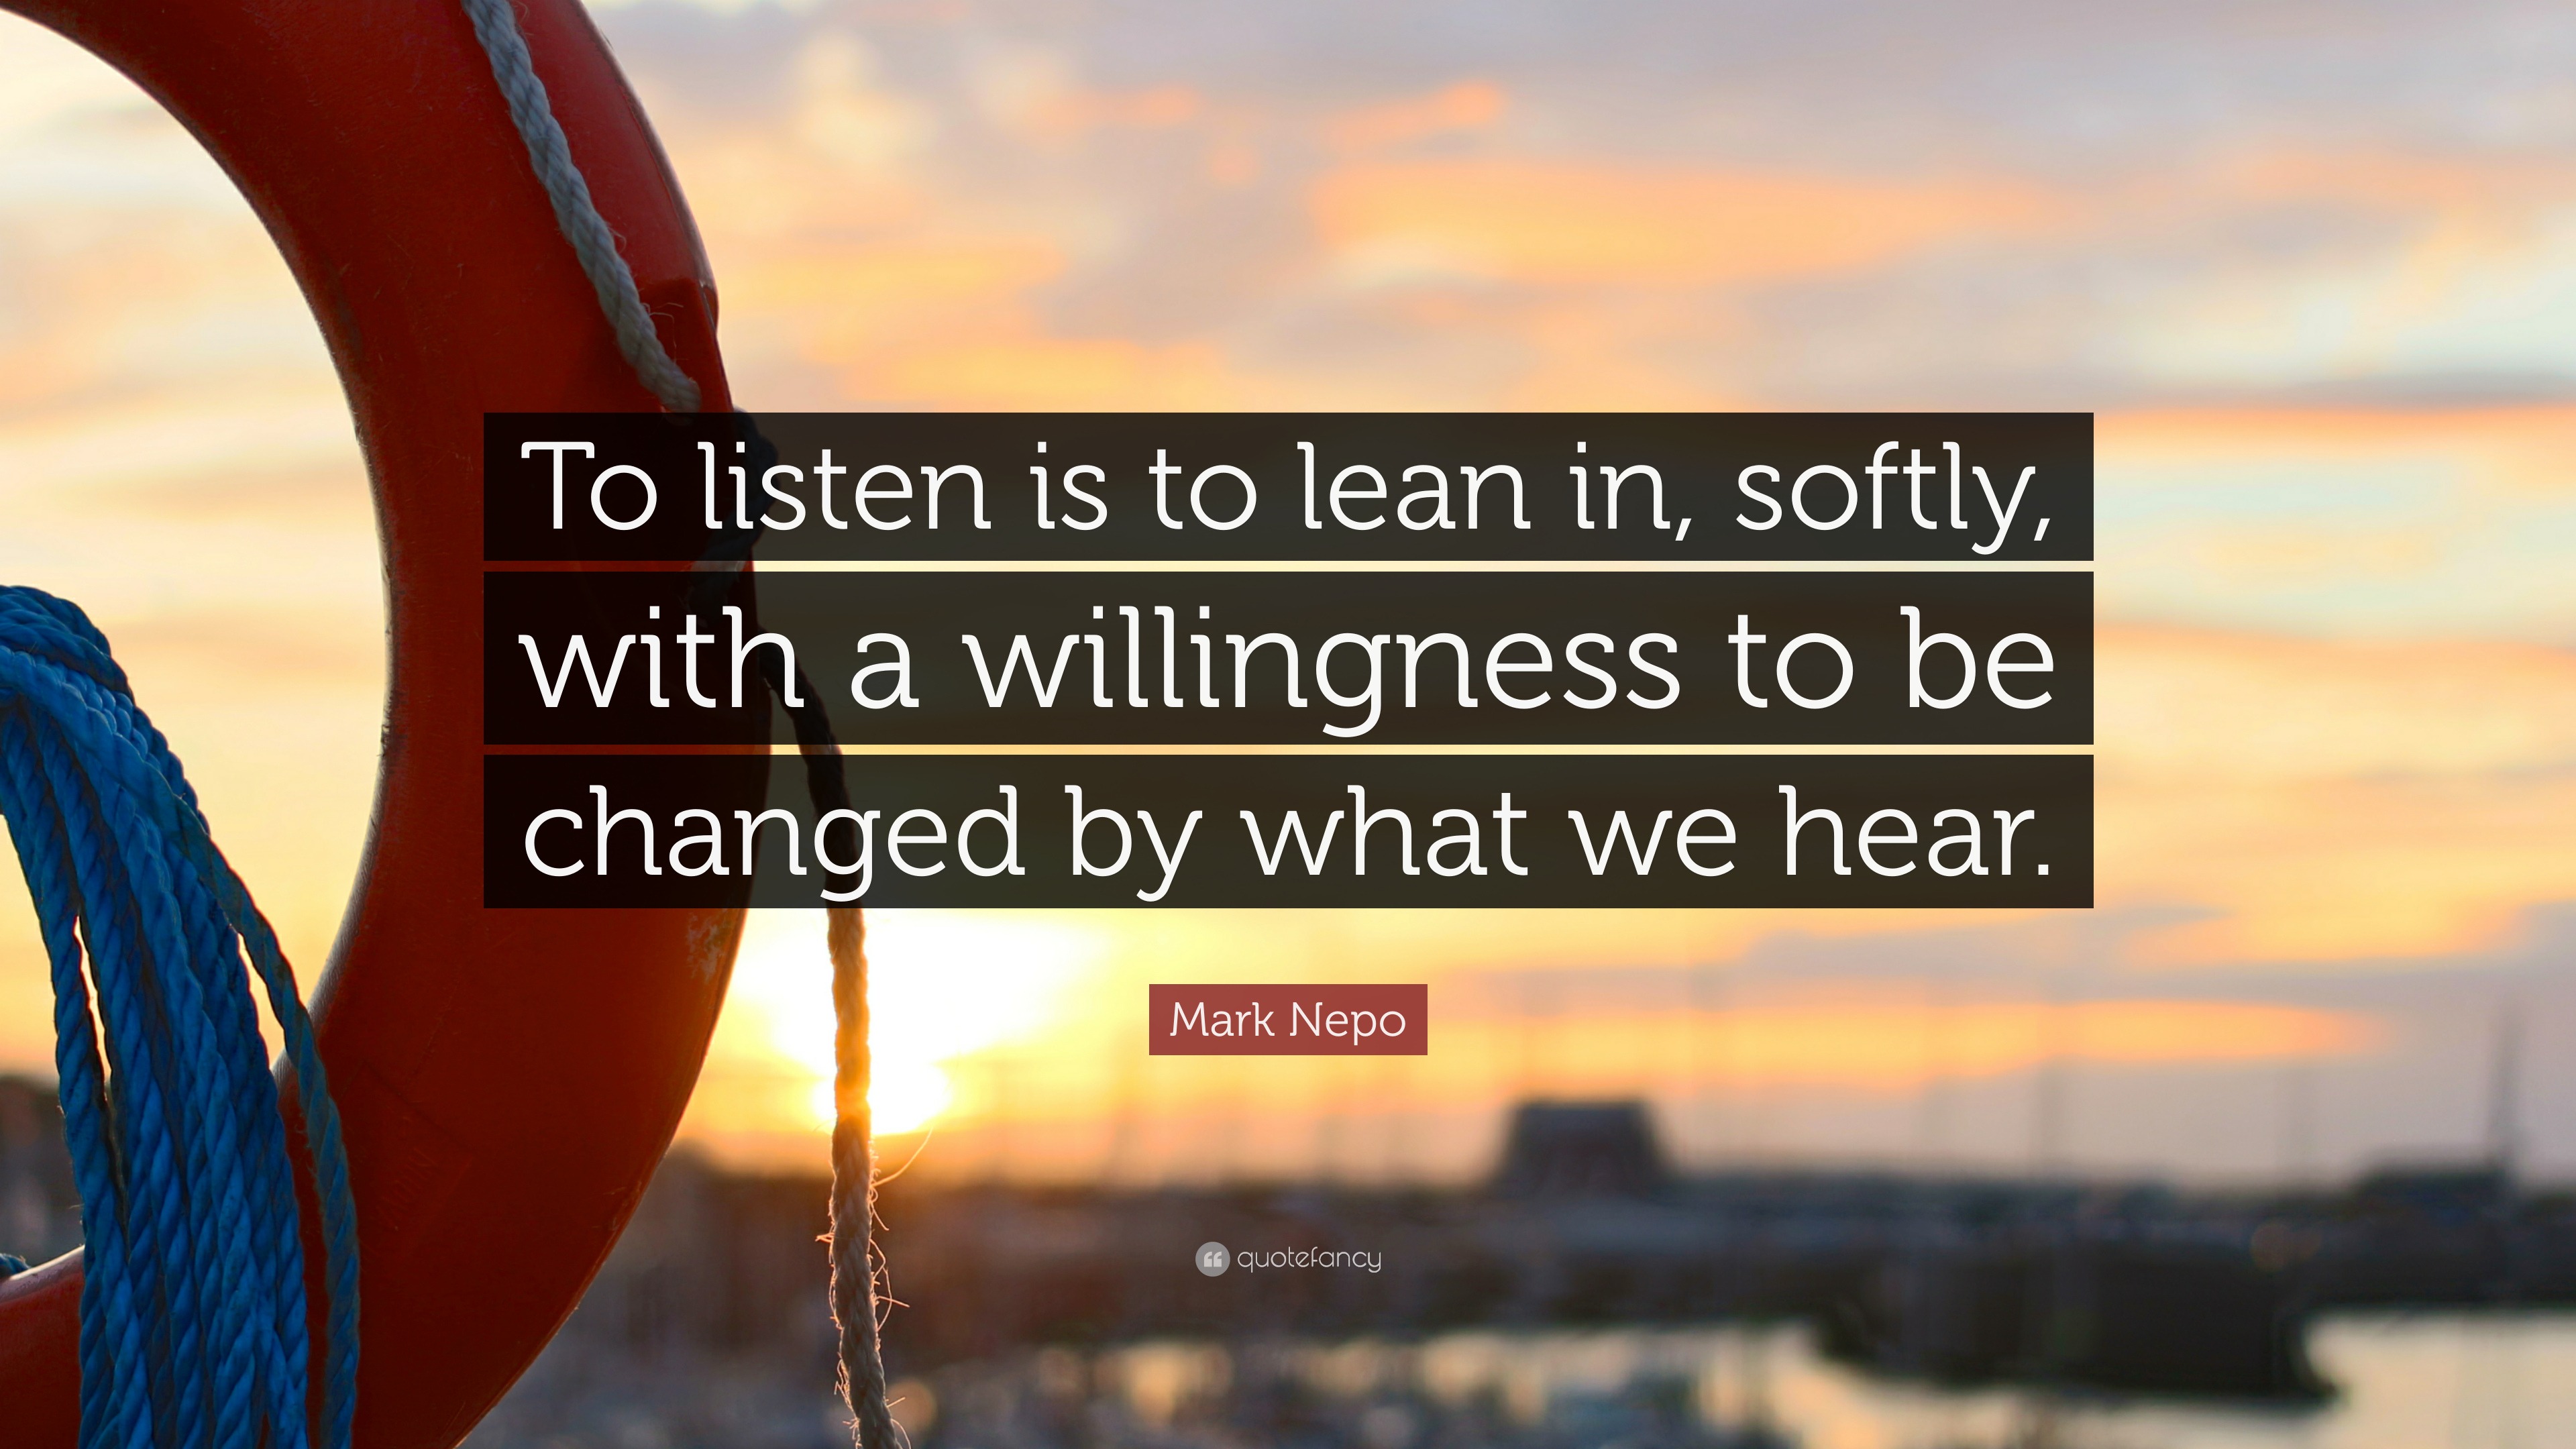 2123591 Mark Nepo Quote To listen is to lean in softly with a willingness